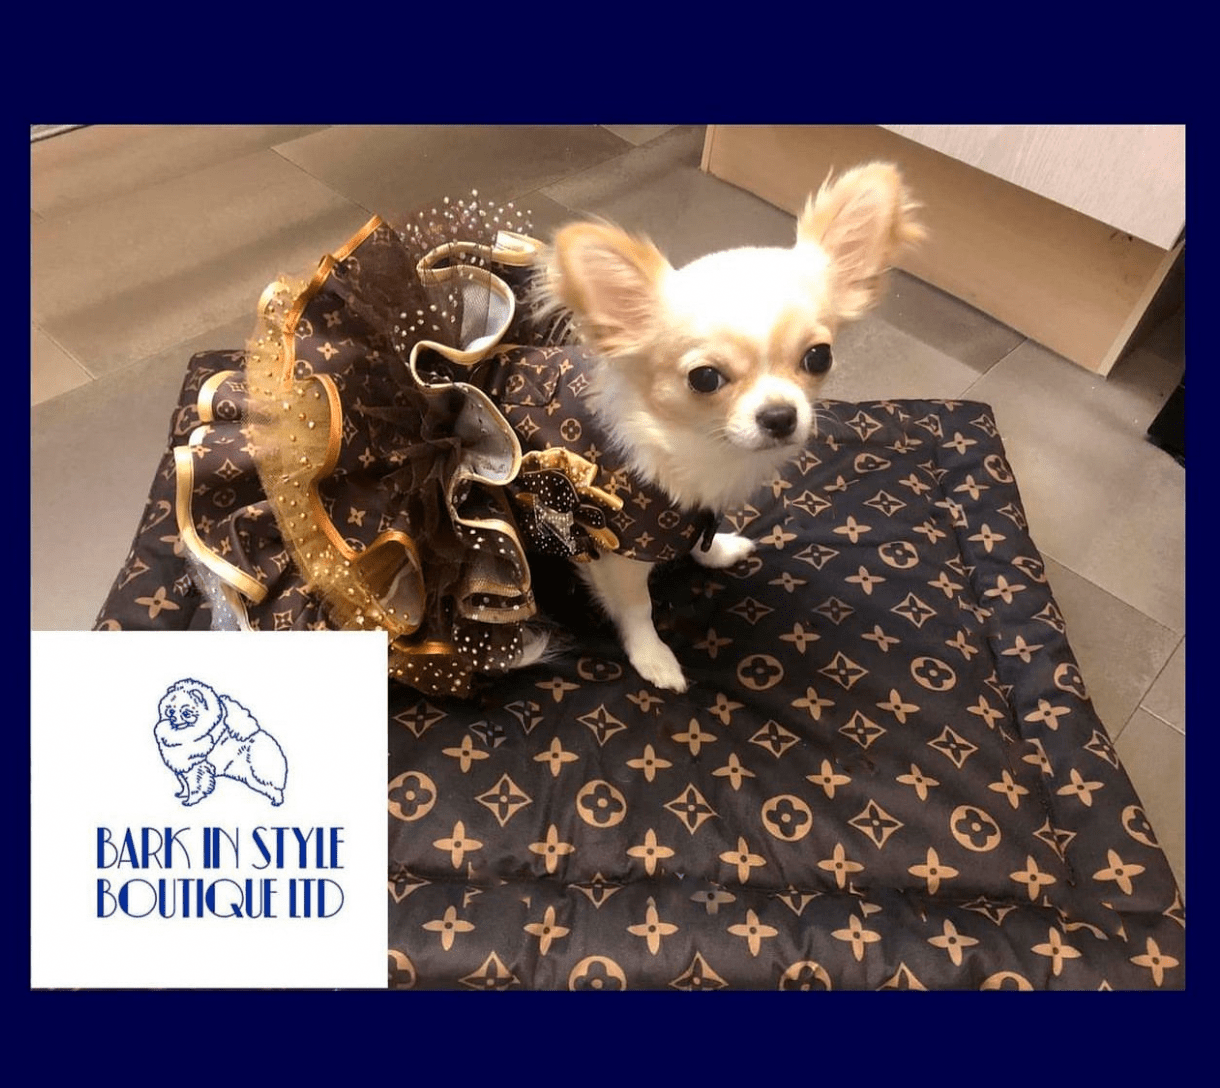 chewy vuitton dog sweater